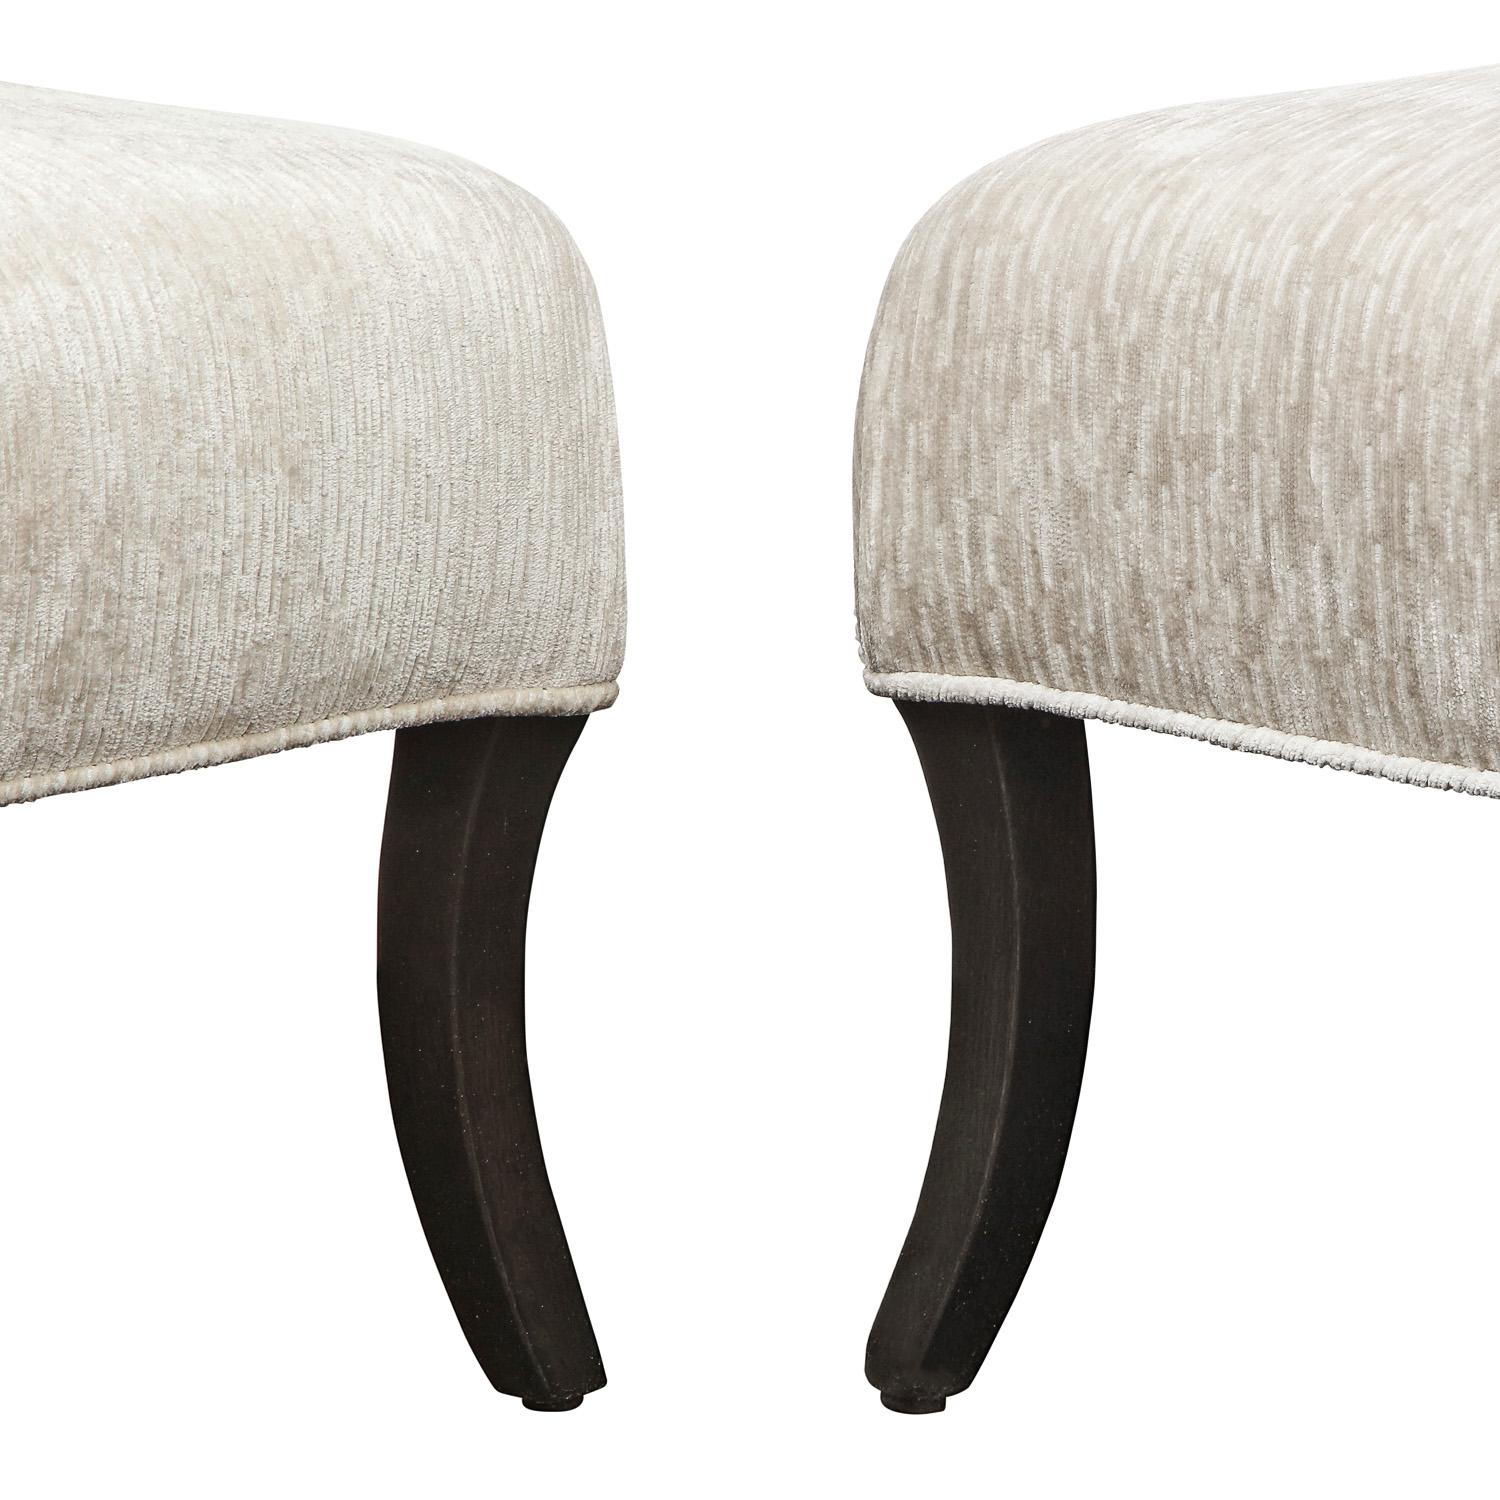 Pair of Elegant Slipper Chairs in The Manner of Billy Haines 1940s In Excellent Condition For Sale In New York, NY